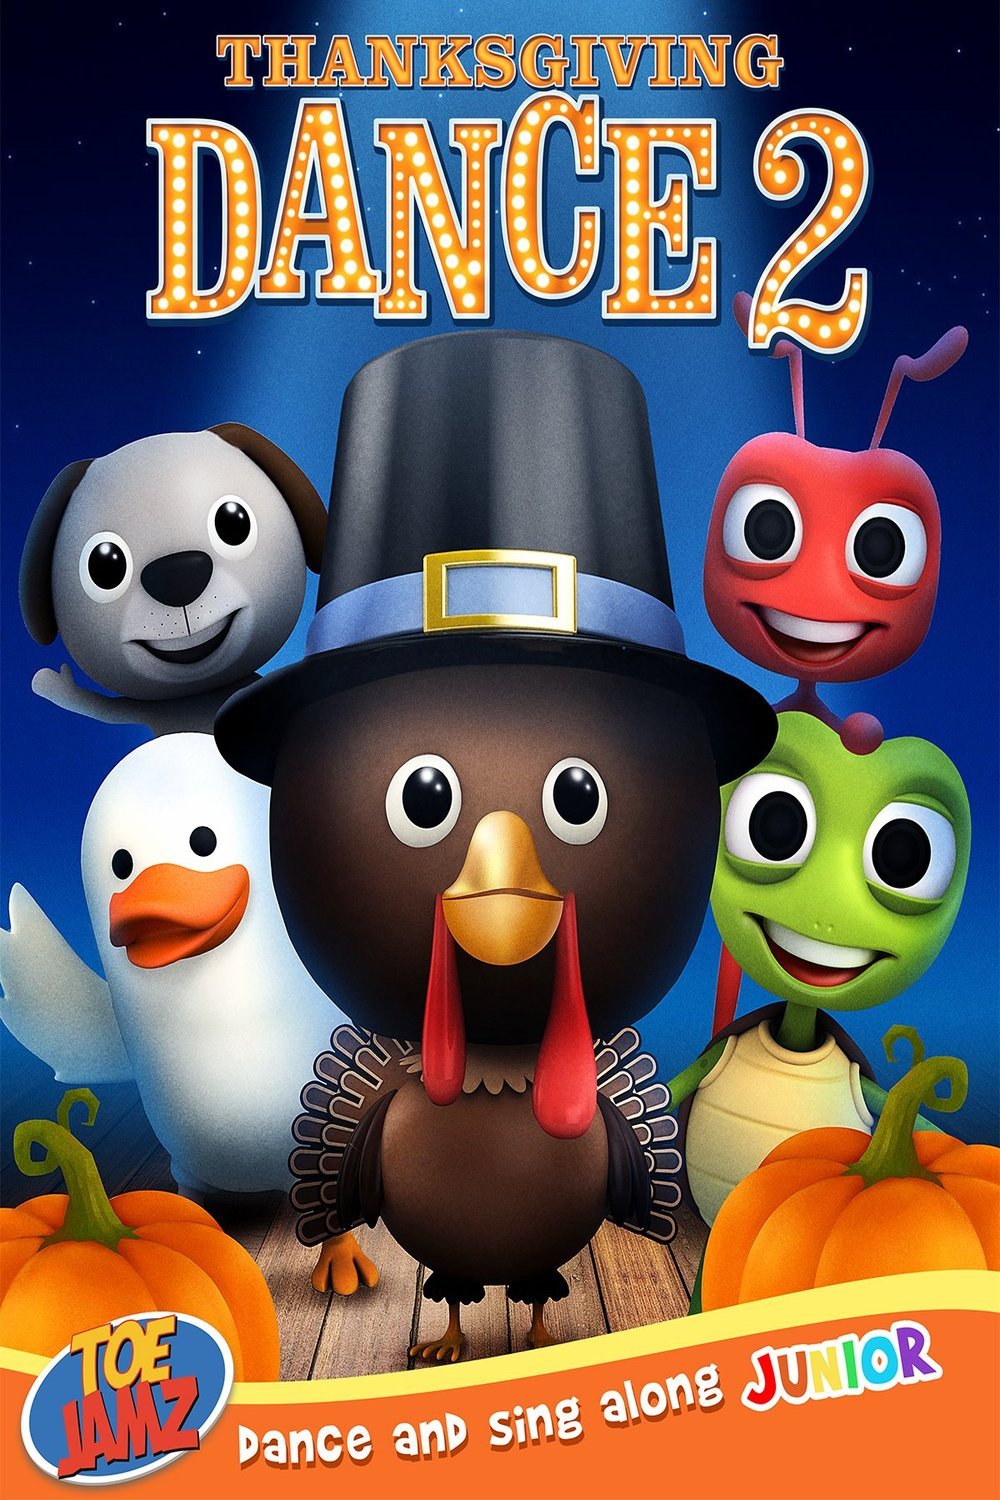 Poster of the movie Thanksgiving Dance Two